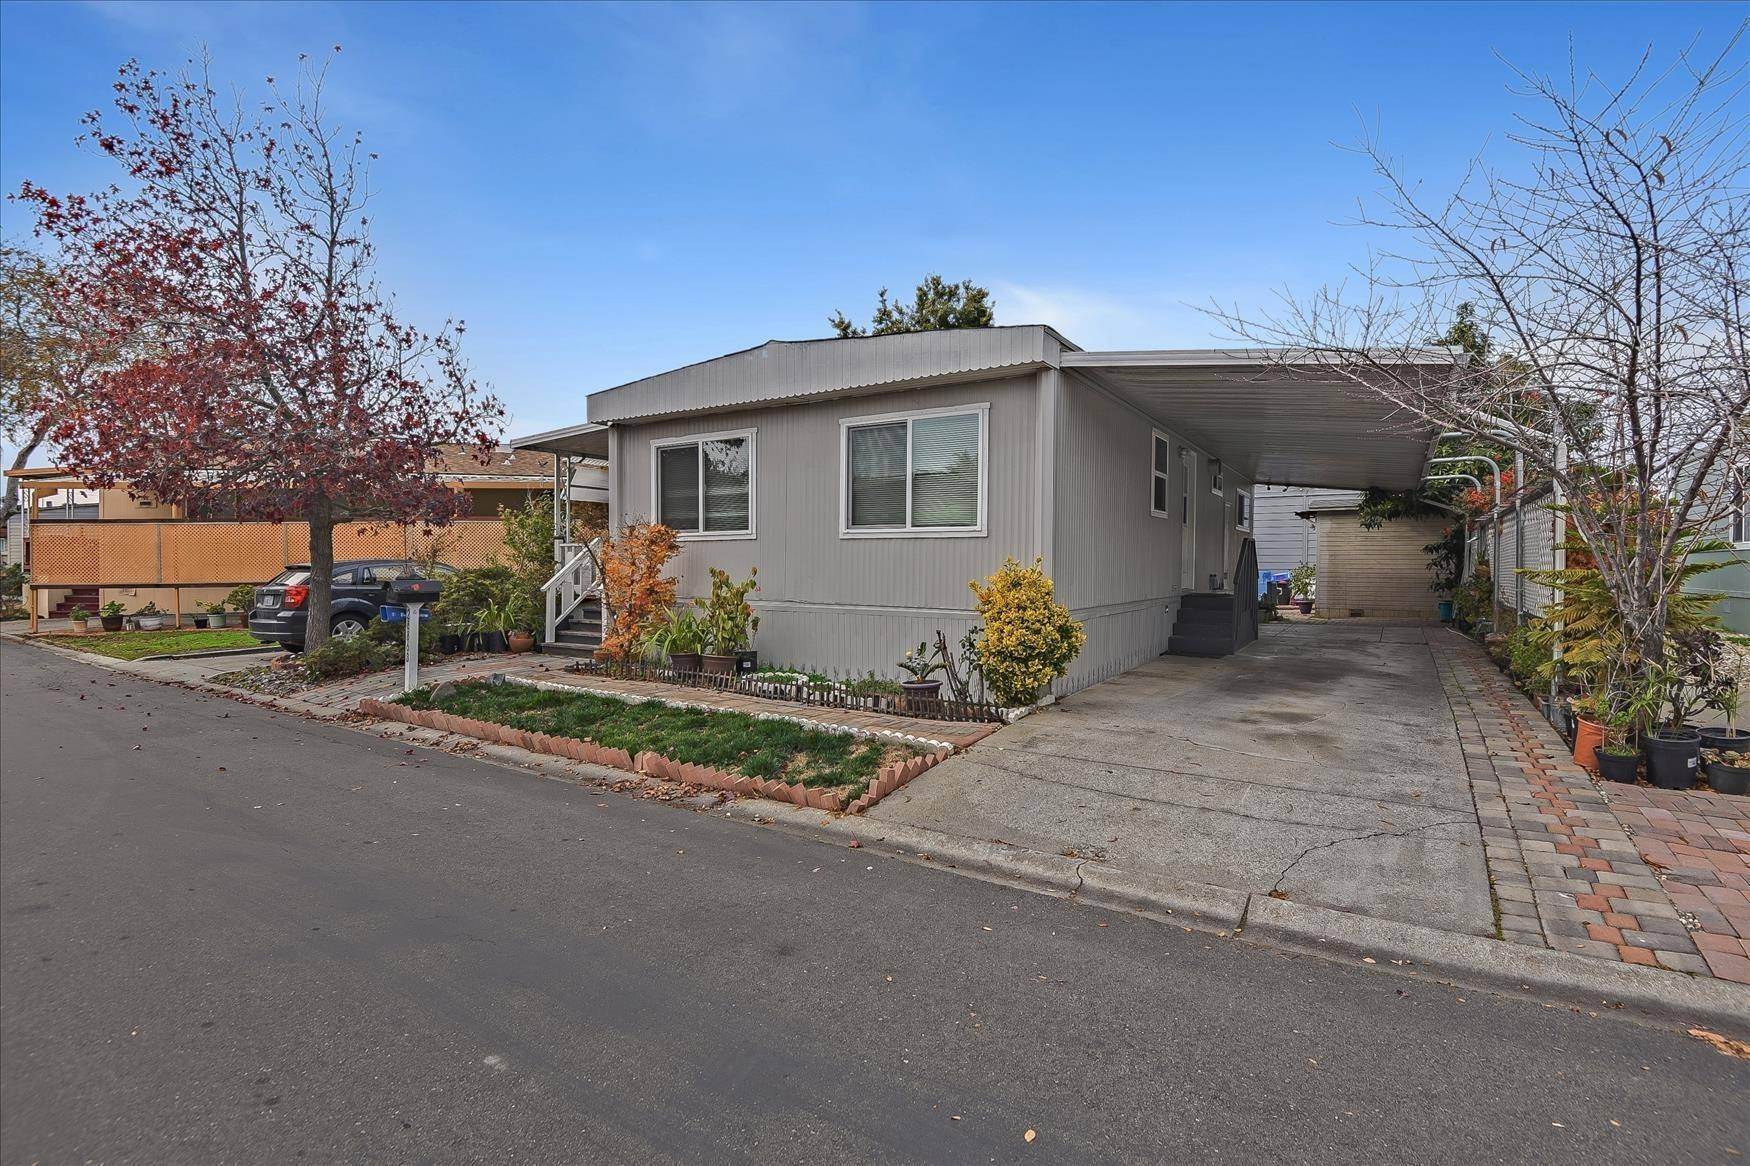 2. Mobile Home for Sale at Hayward, CA 94544